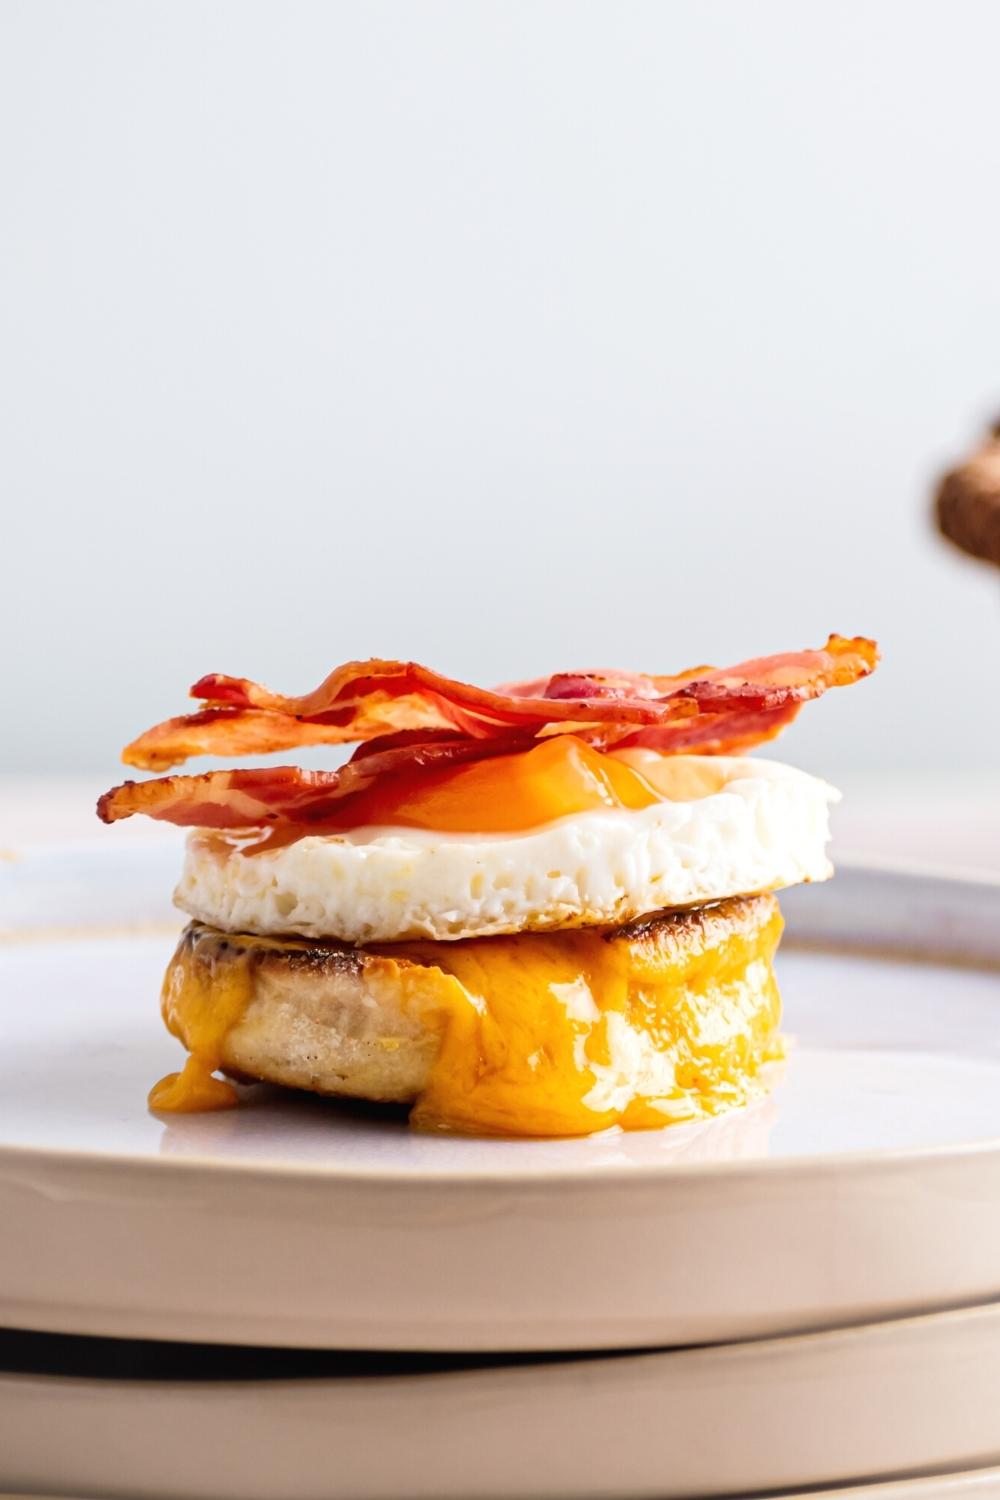 Two slices of bacon on an egg on top of cheese on an English muffin on a plate.